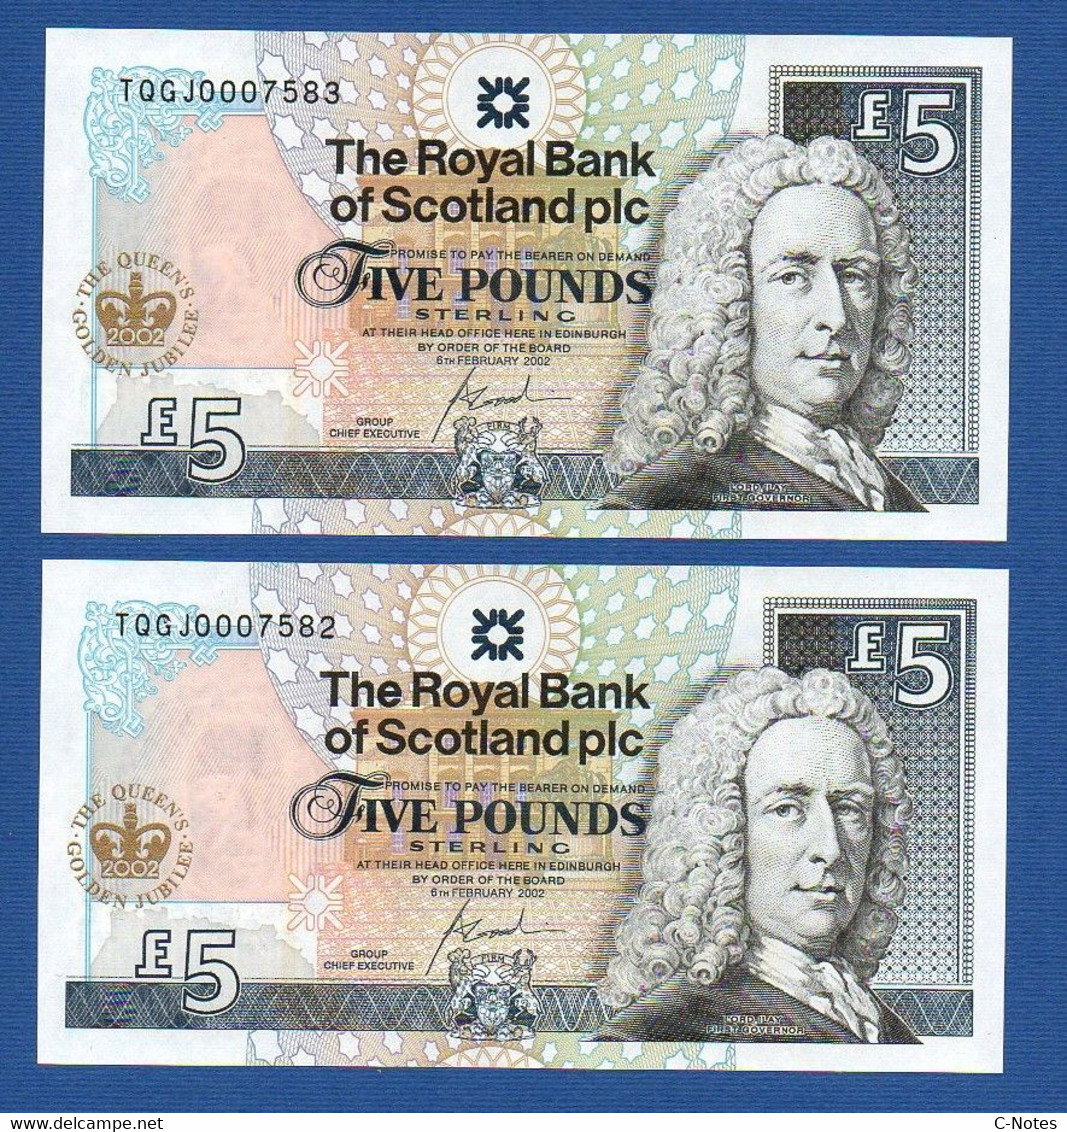 SCOTLAND - P.362 – 2 X 5 POUNDS 2002 UNC, Serie TQGJ0007582 + ...7583 "Queen's Golden Jubilee" Comm. Issue - Low Number - 5 Pounds